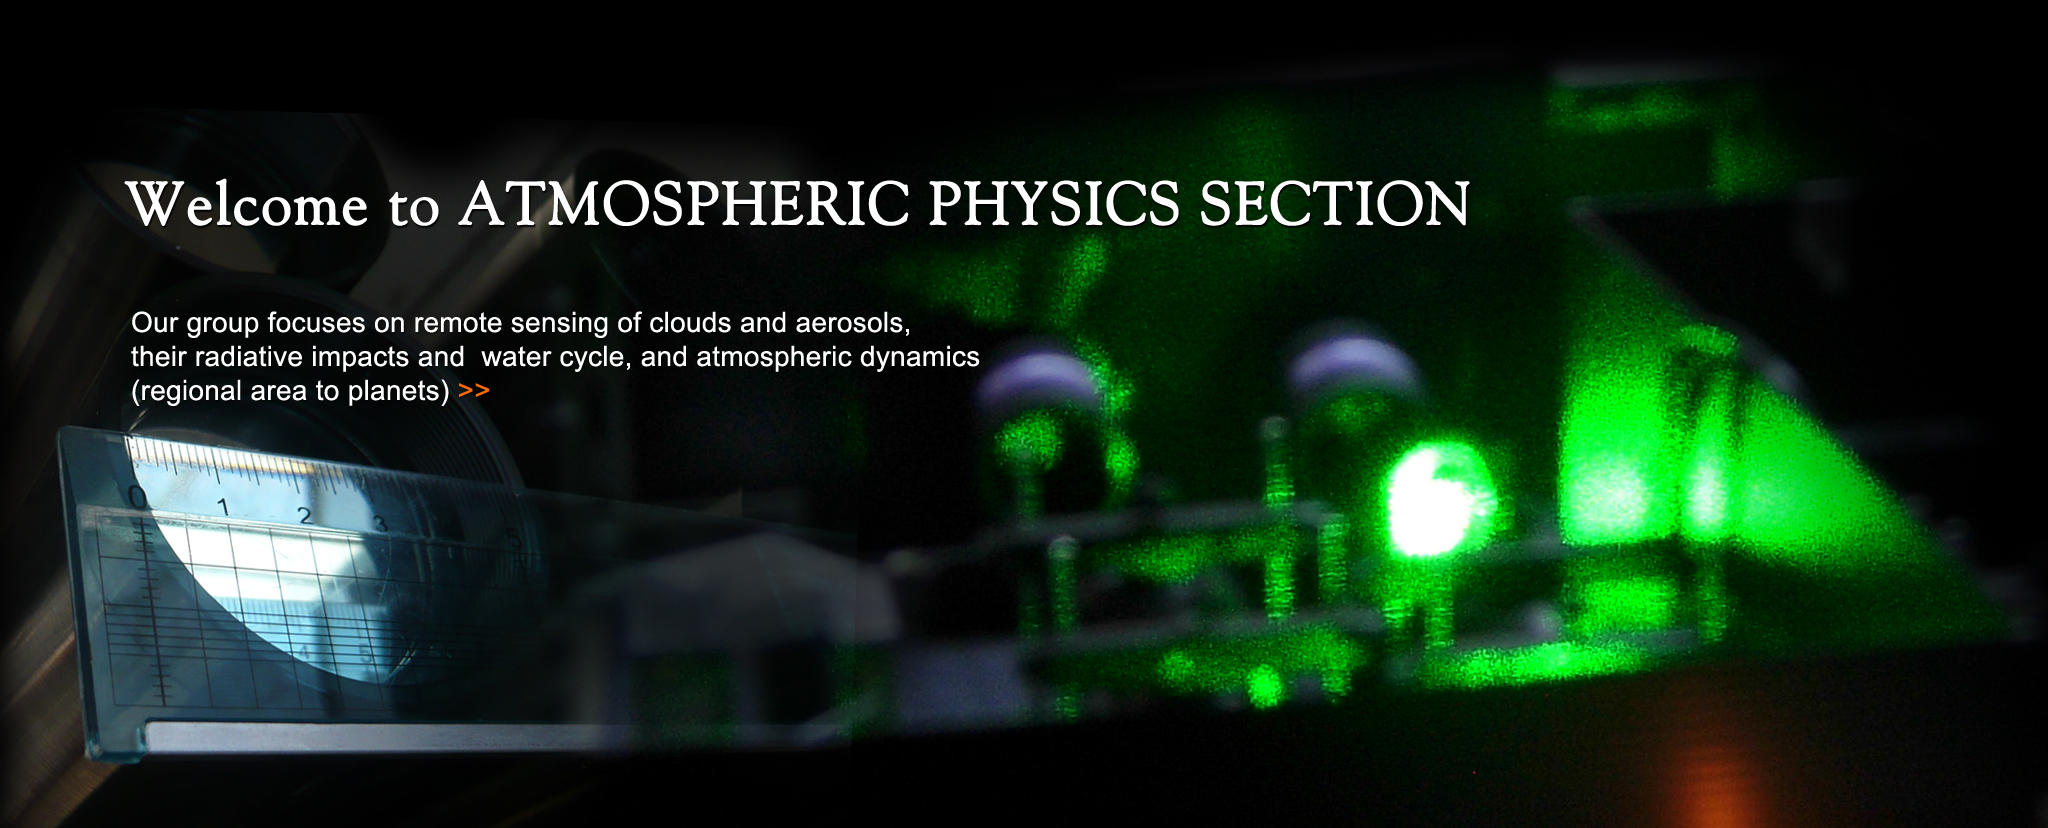 Welcome to ATMOSPHERIC PHYSICS SECTION